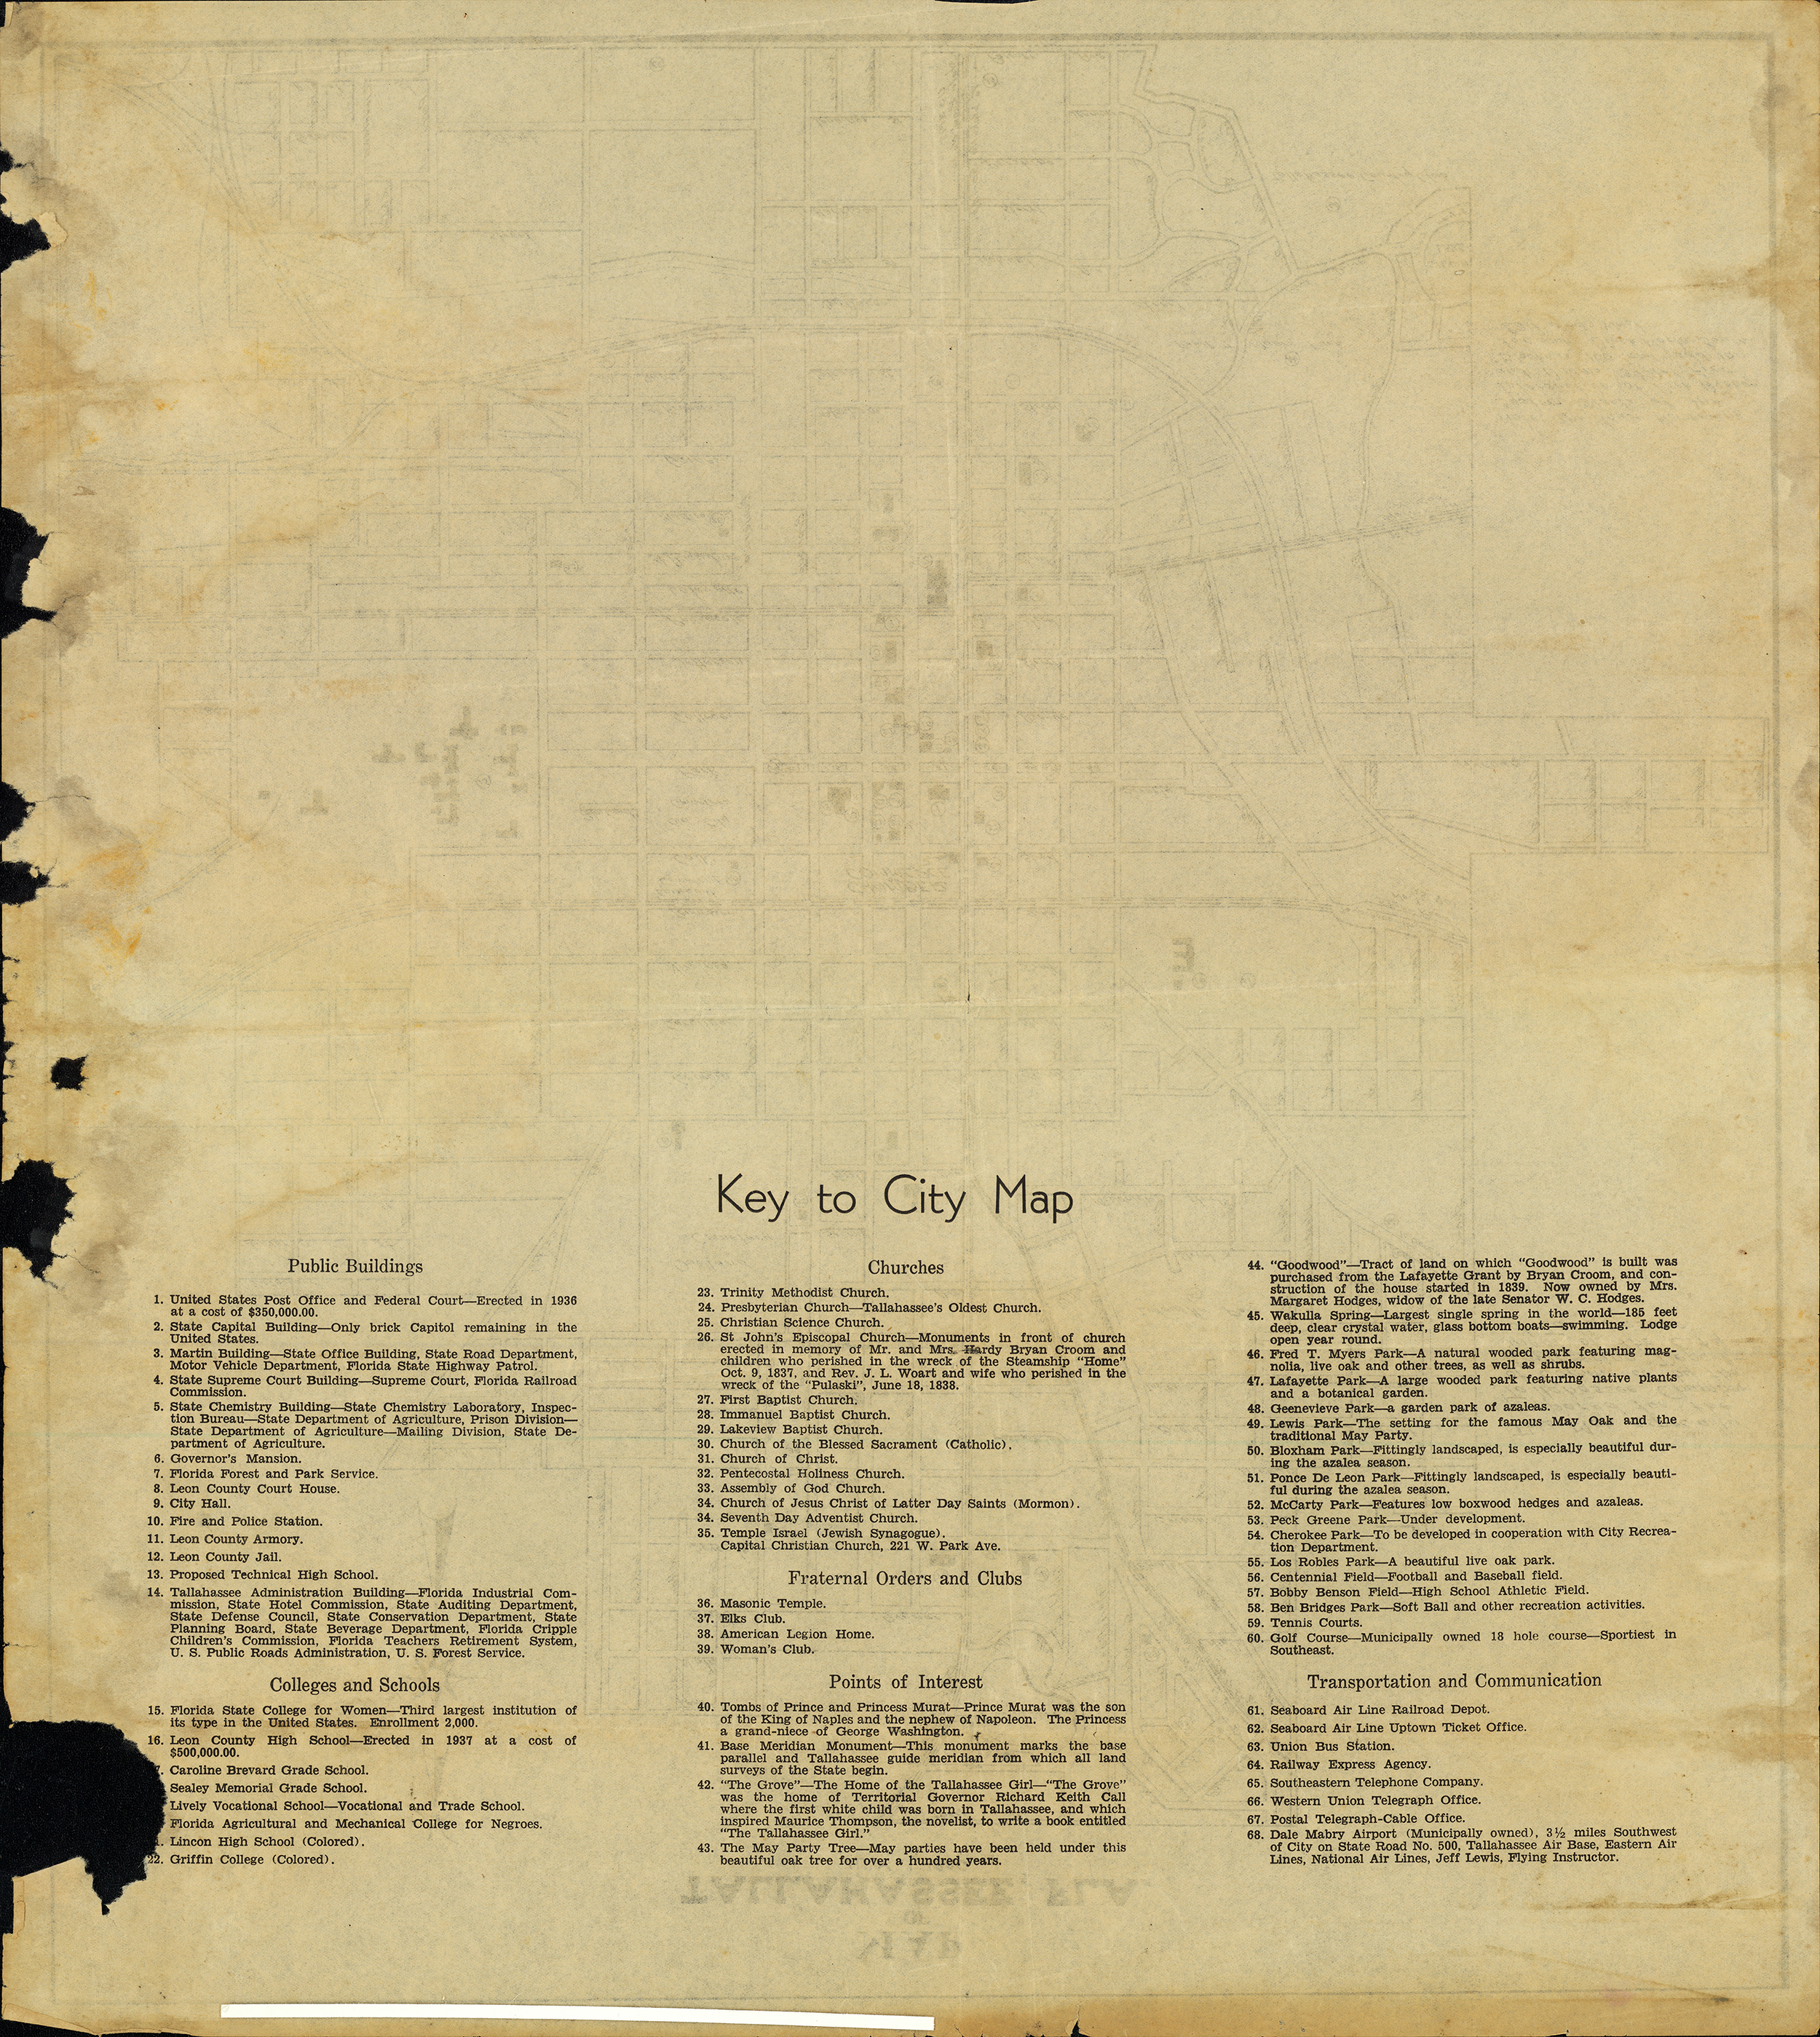 Map of Tallahassee, 1940